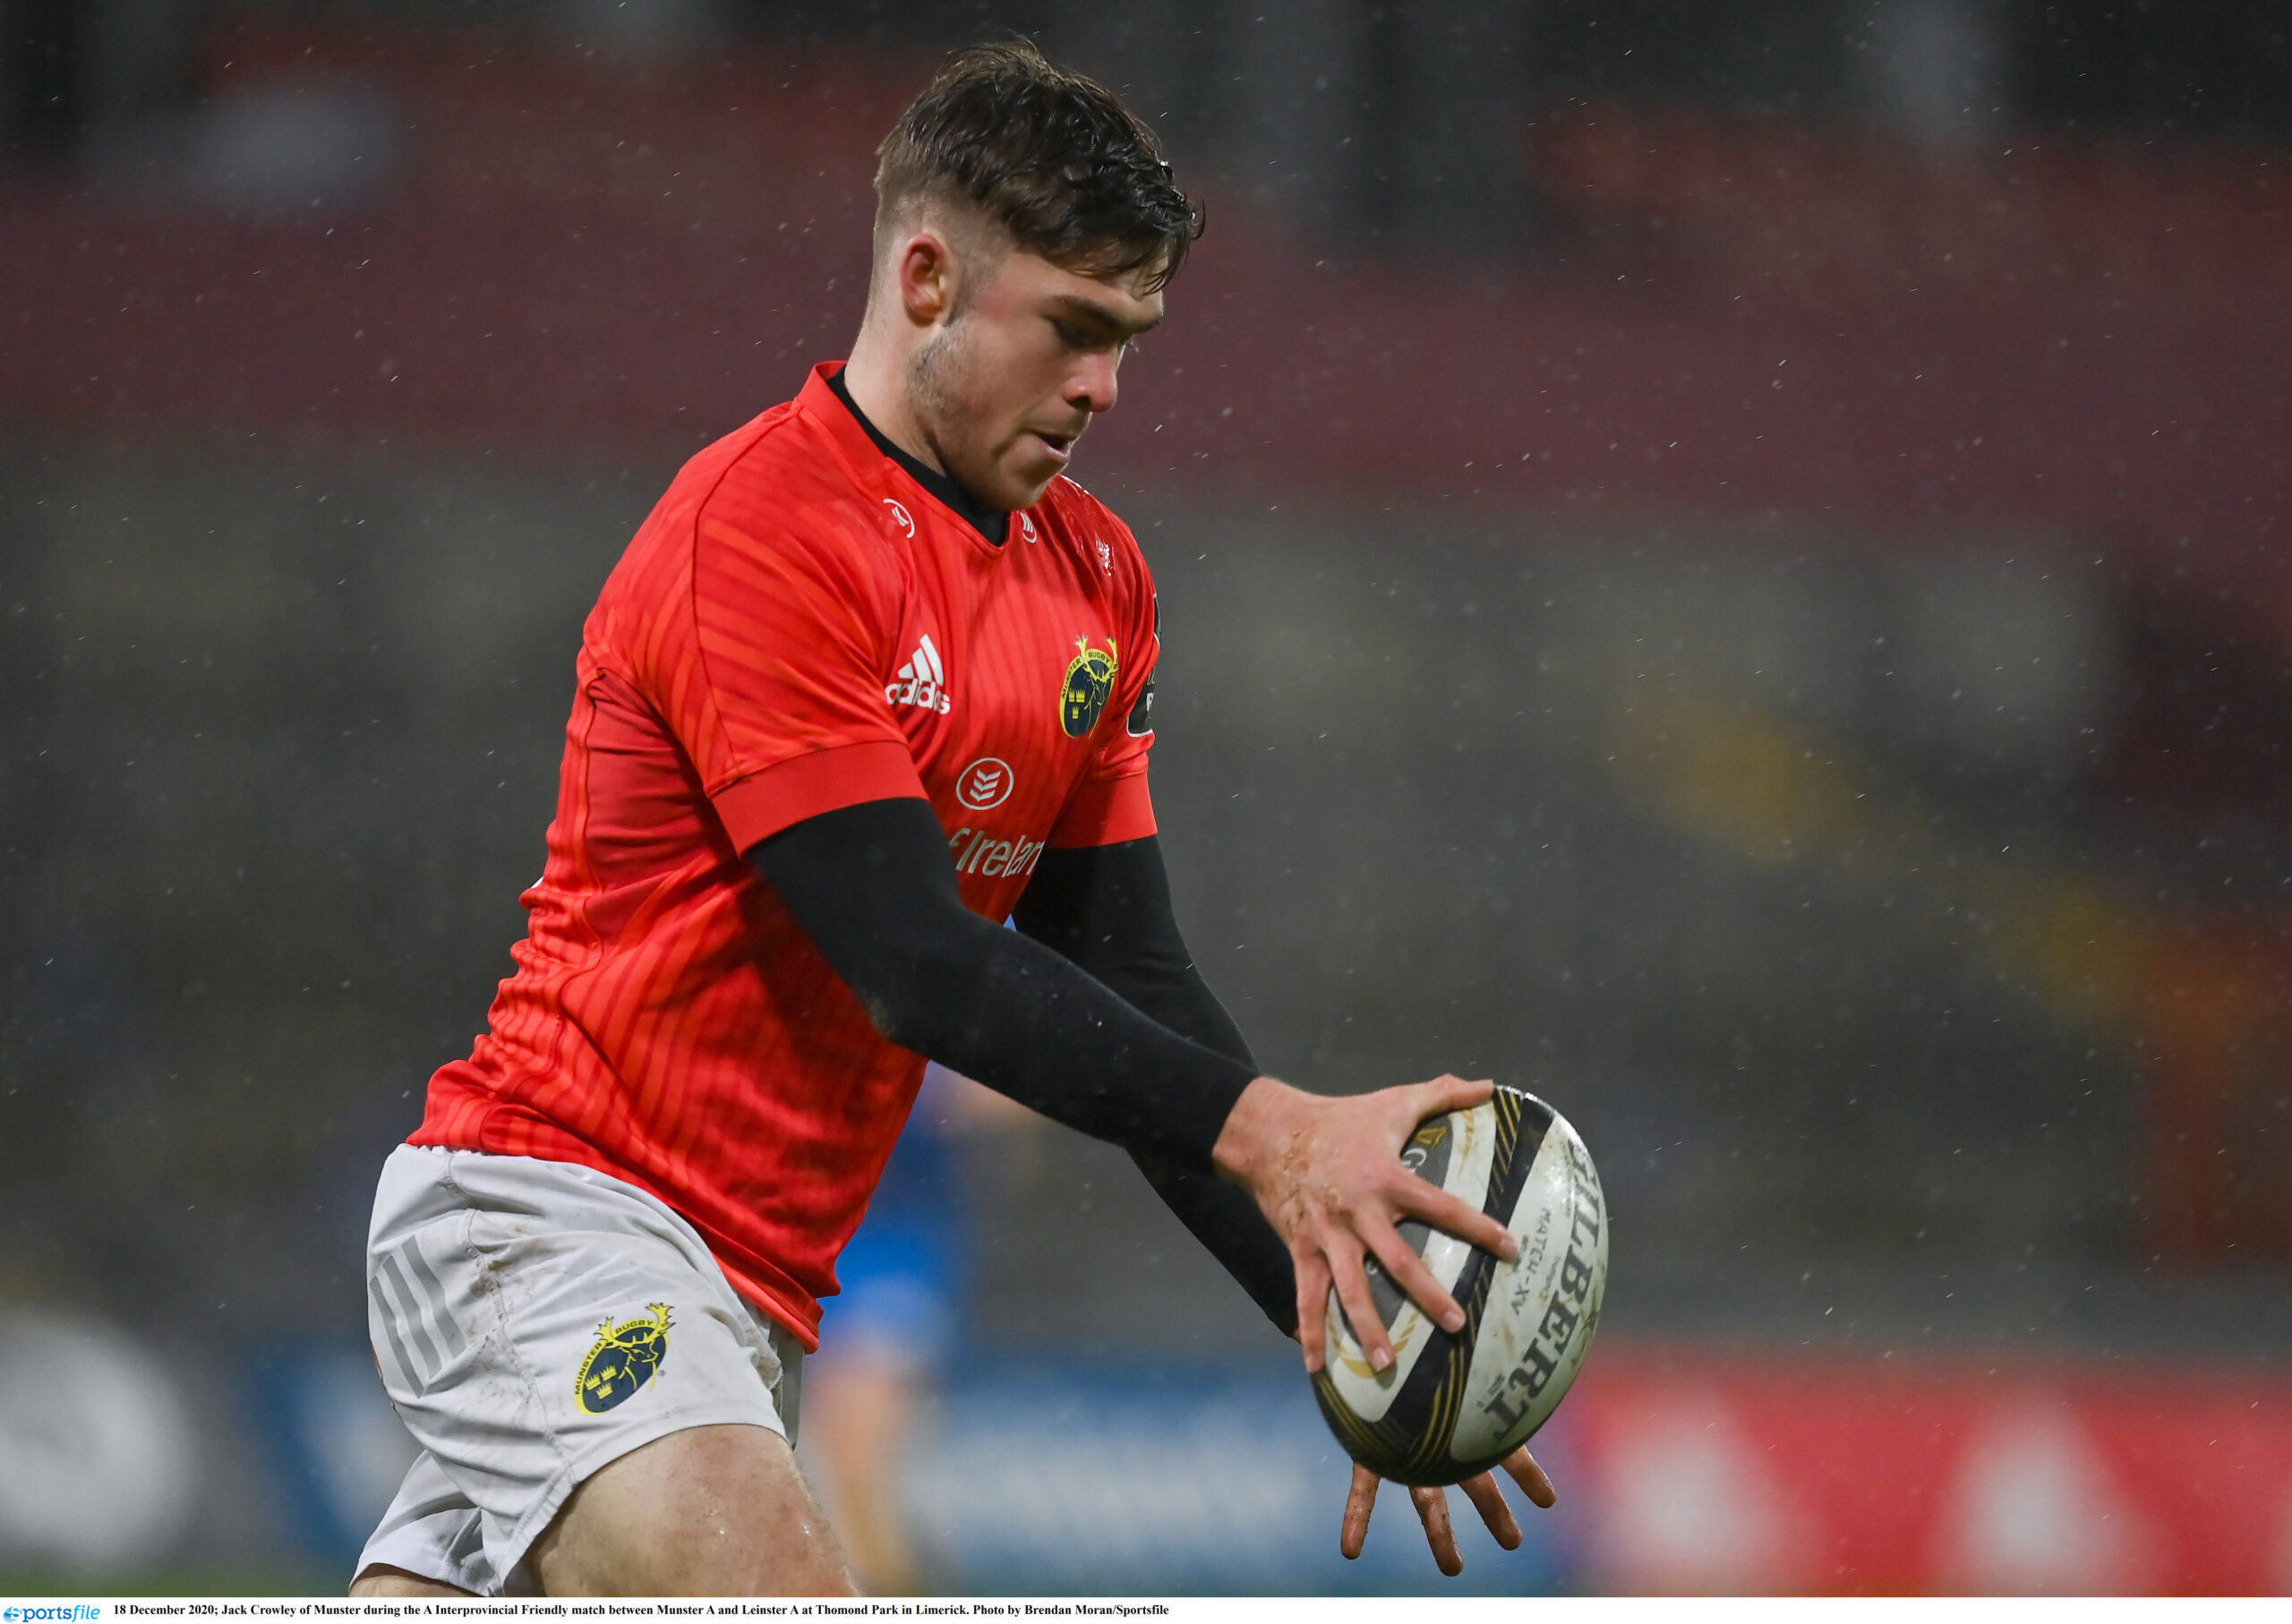 Jack Crowley And The Future Of The Munster Ten Shirt